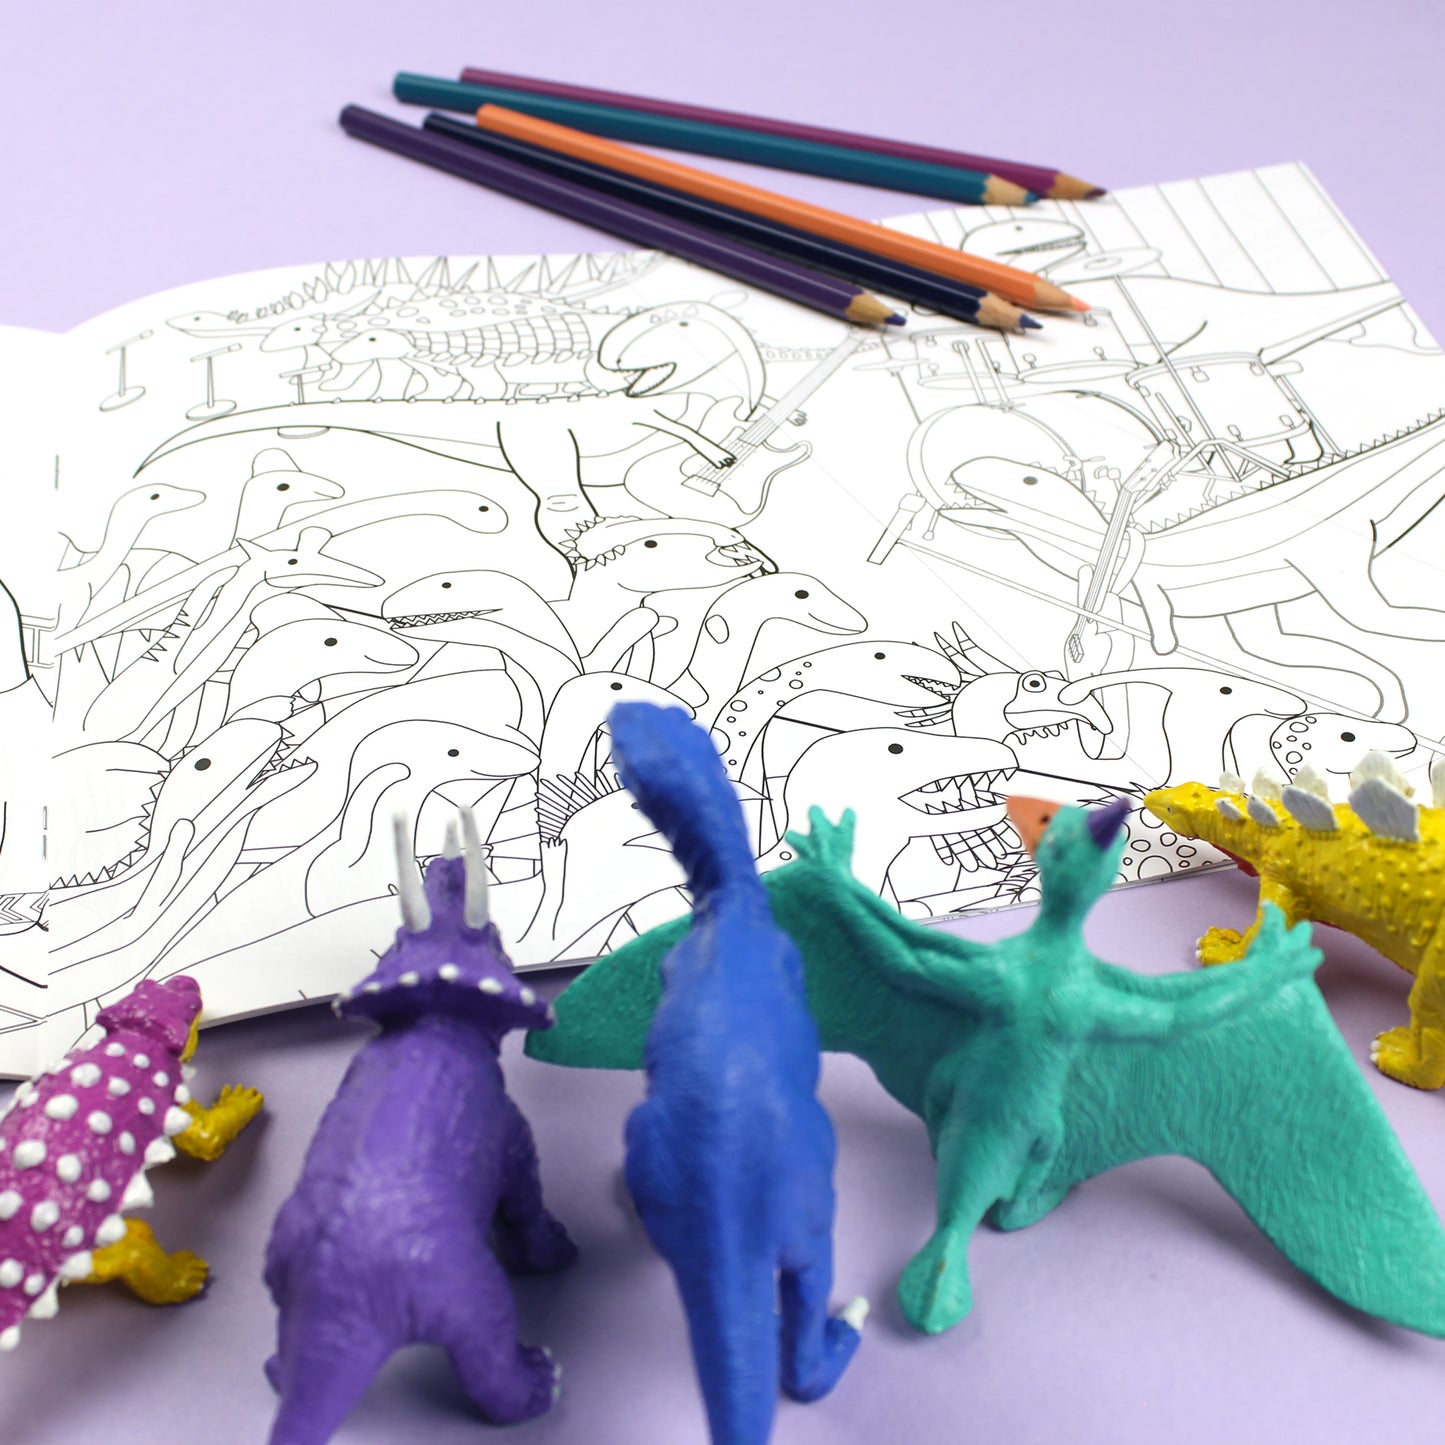 Inside page of Dinosaurs Doing Stuff colouring book. The page features black line illustrations of dinosaurs at a rock concert. A group of dinosaurs are crowding the stage while dinosaurs sing and play guitars.